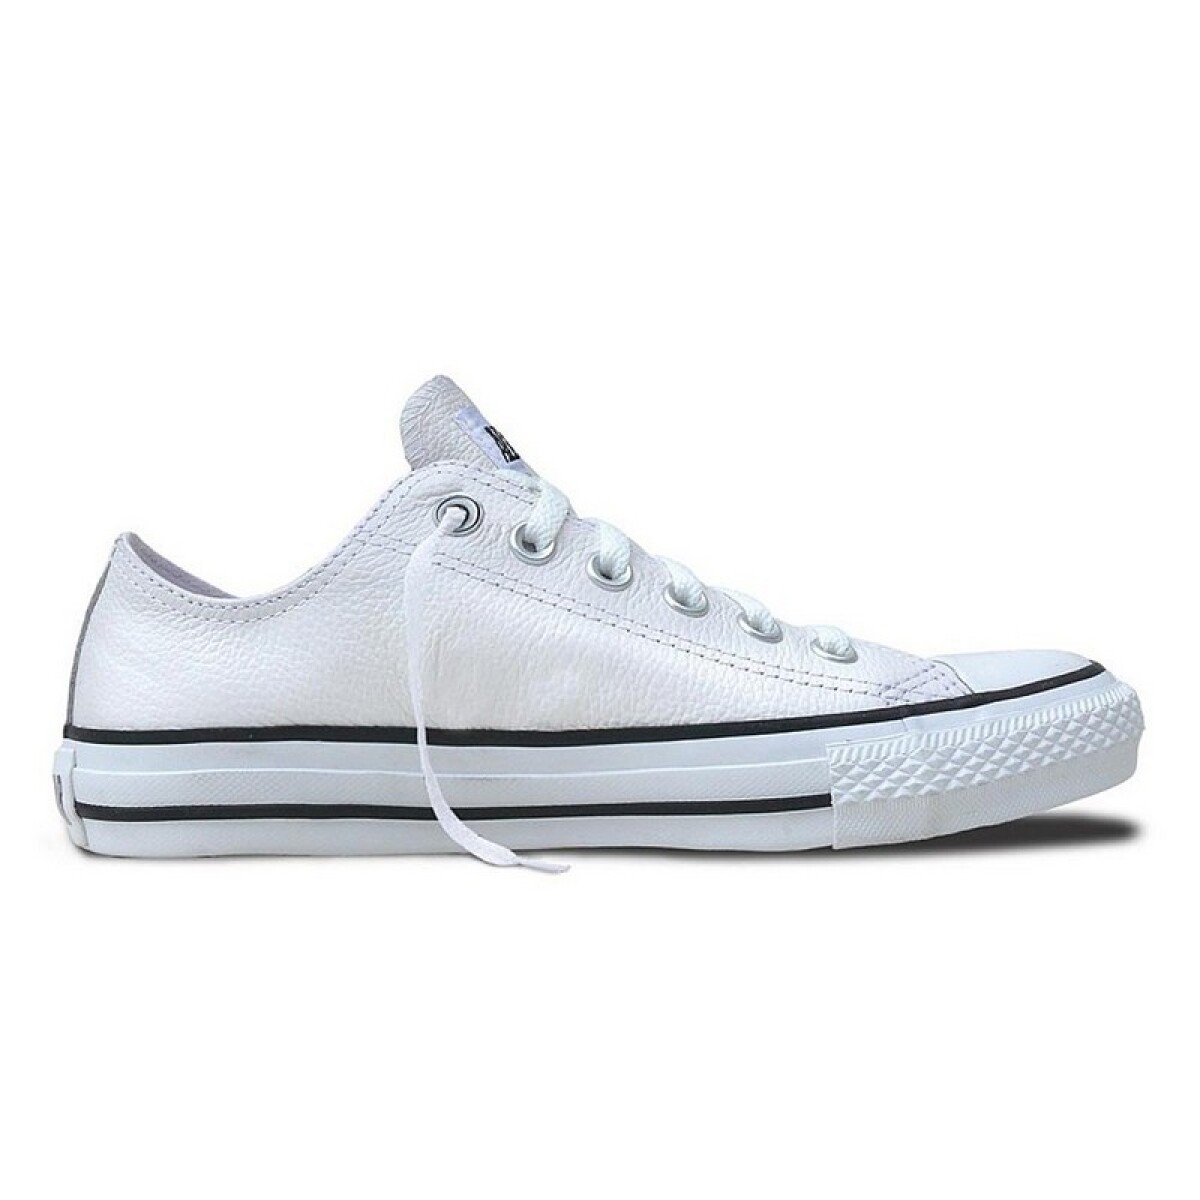 Championes Converse Chuck Taylor AS OX Leather - Blanco 